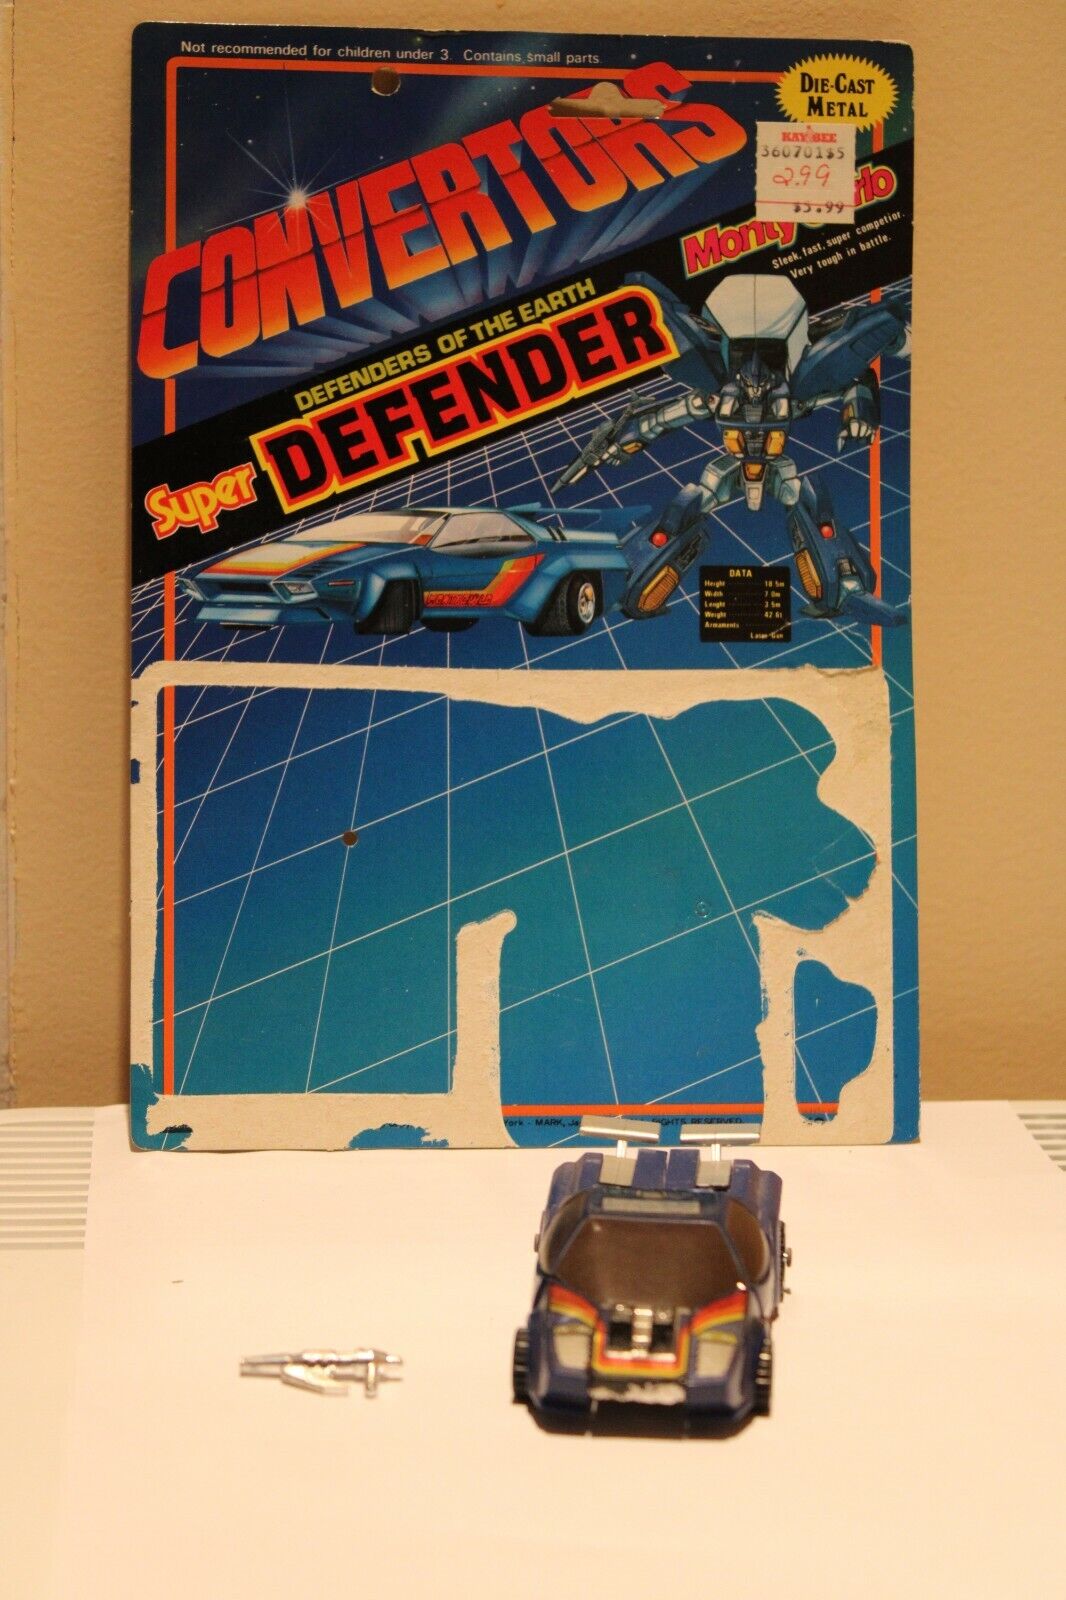  Select Convertors Super Defender Monty Carlo figure with Card back and weapon 